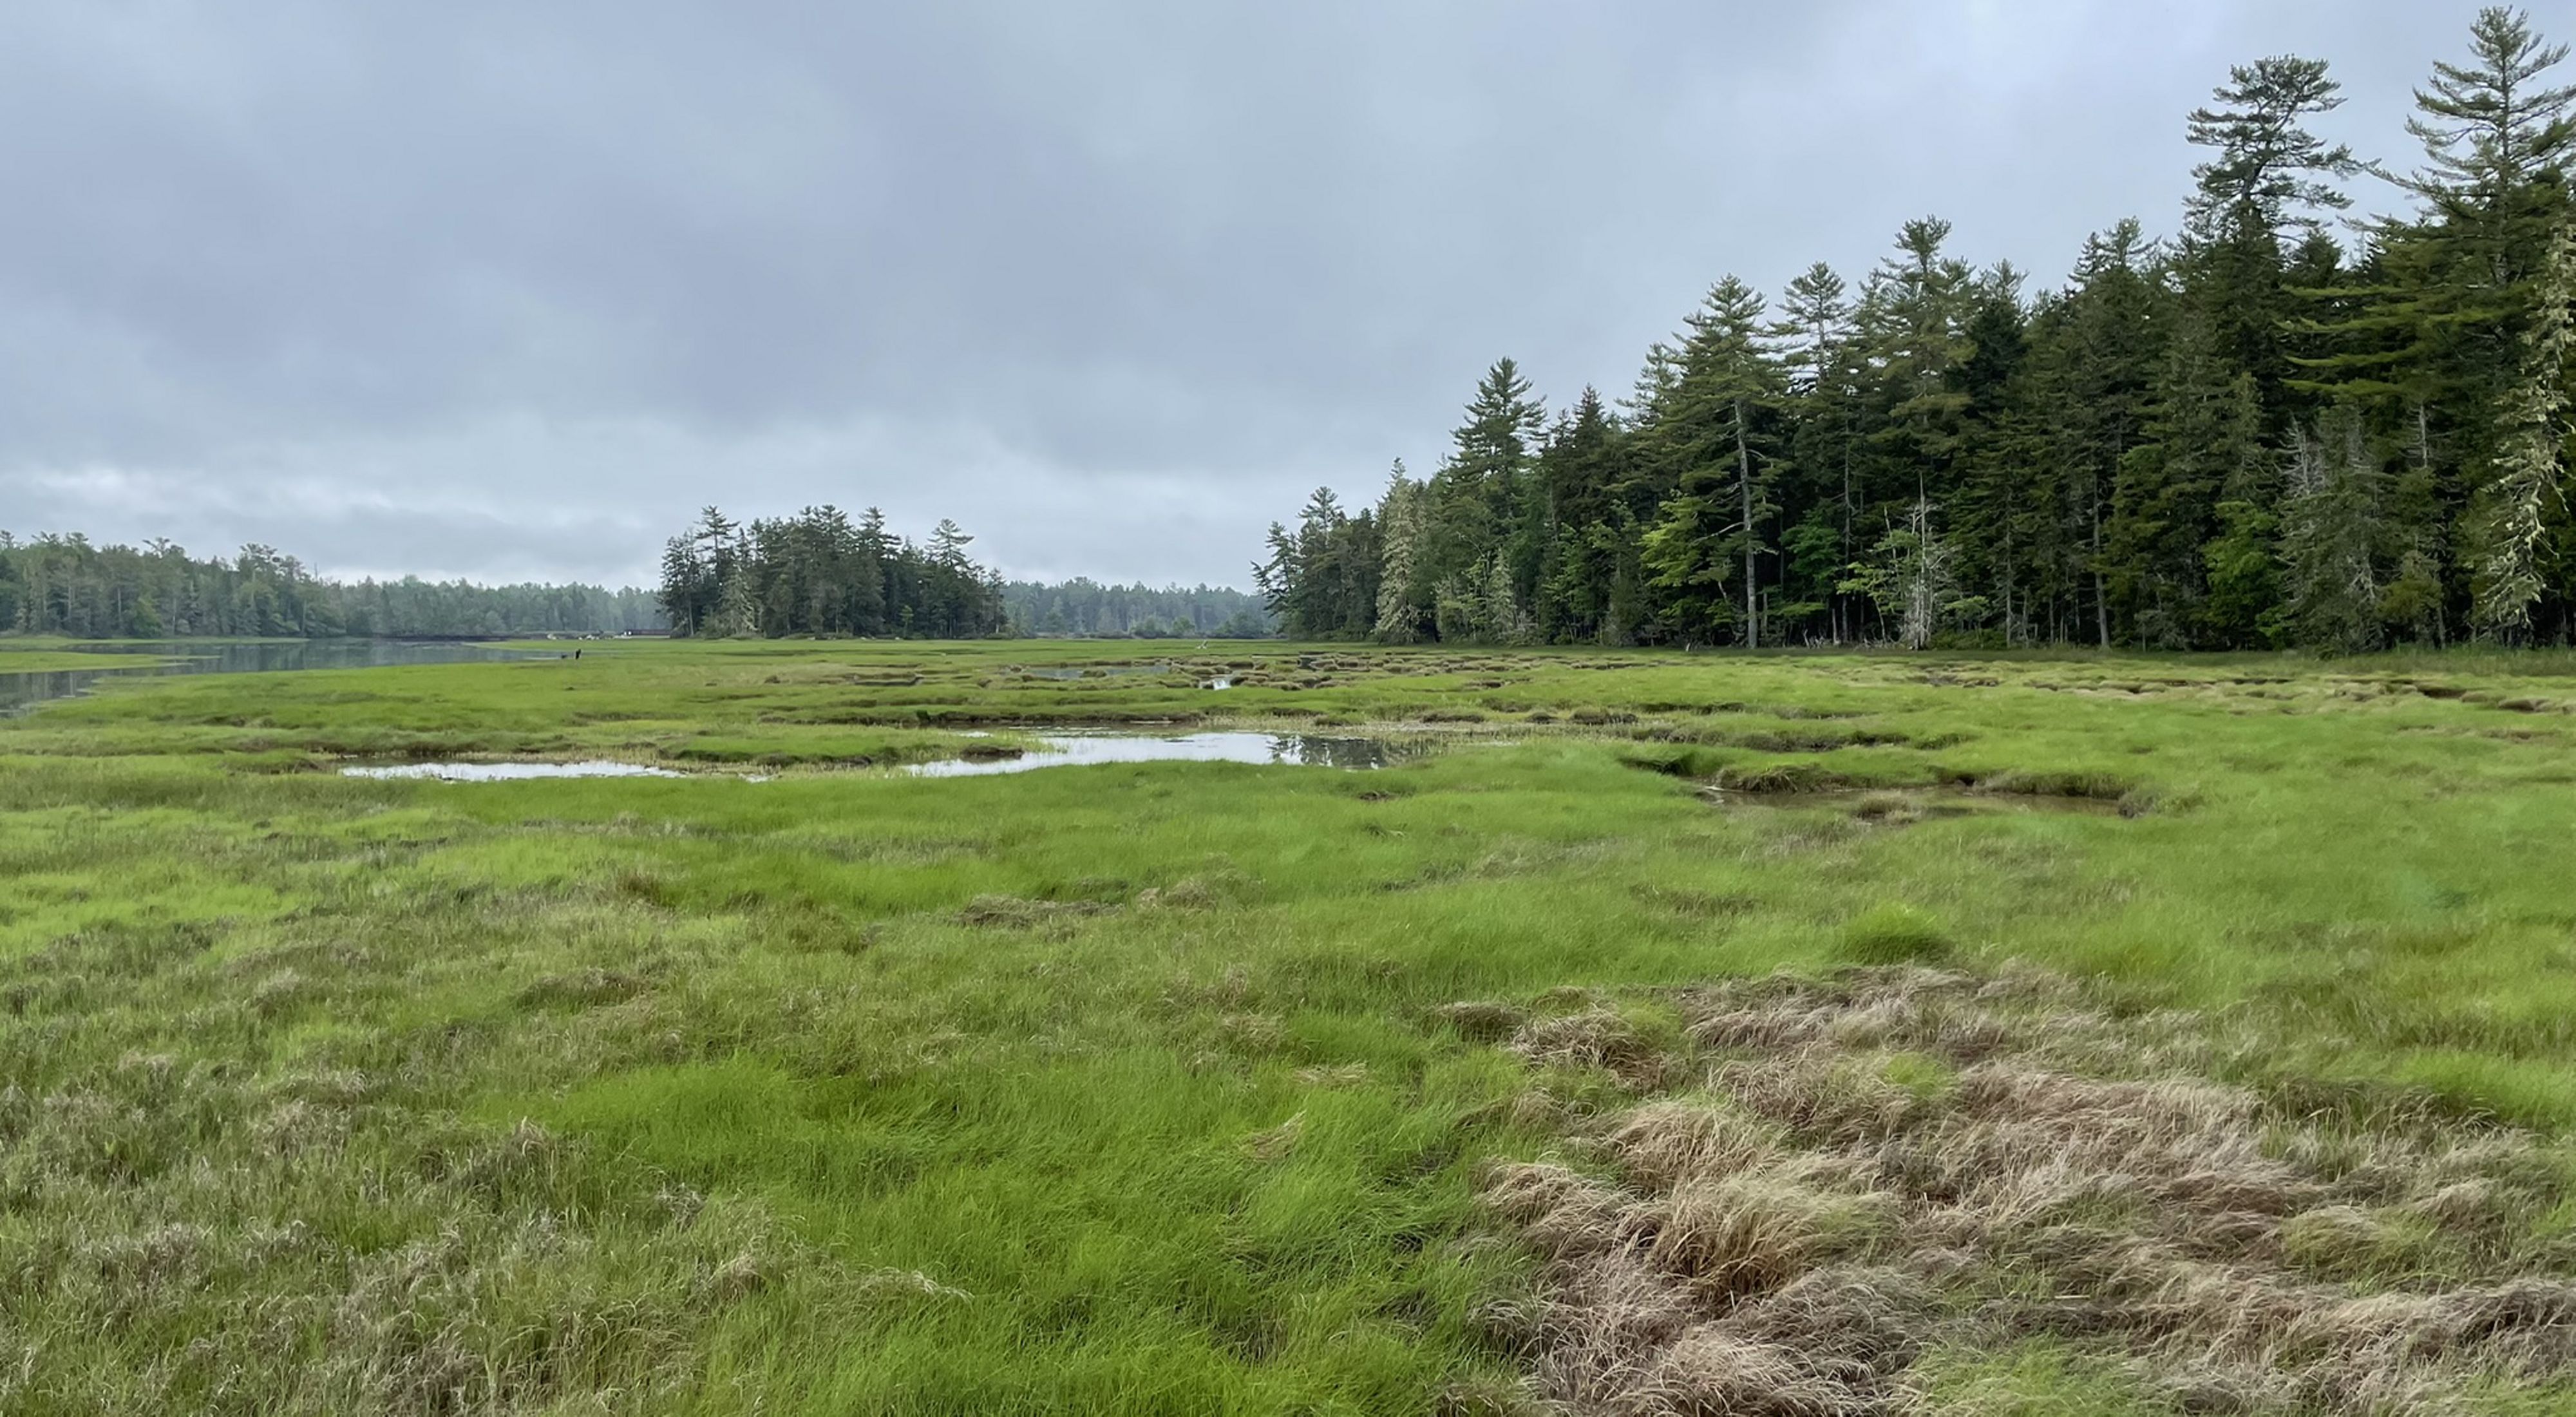 A view of a salt marsh with small forested islands.